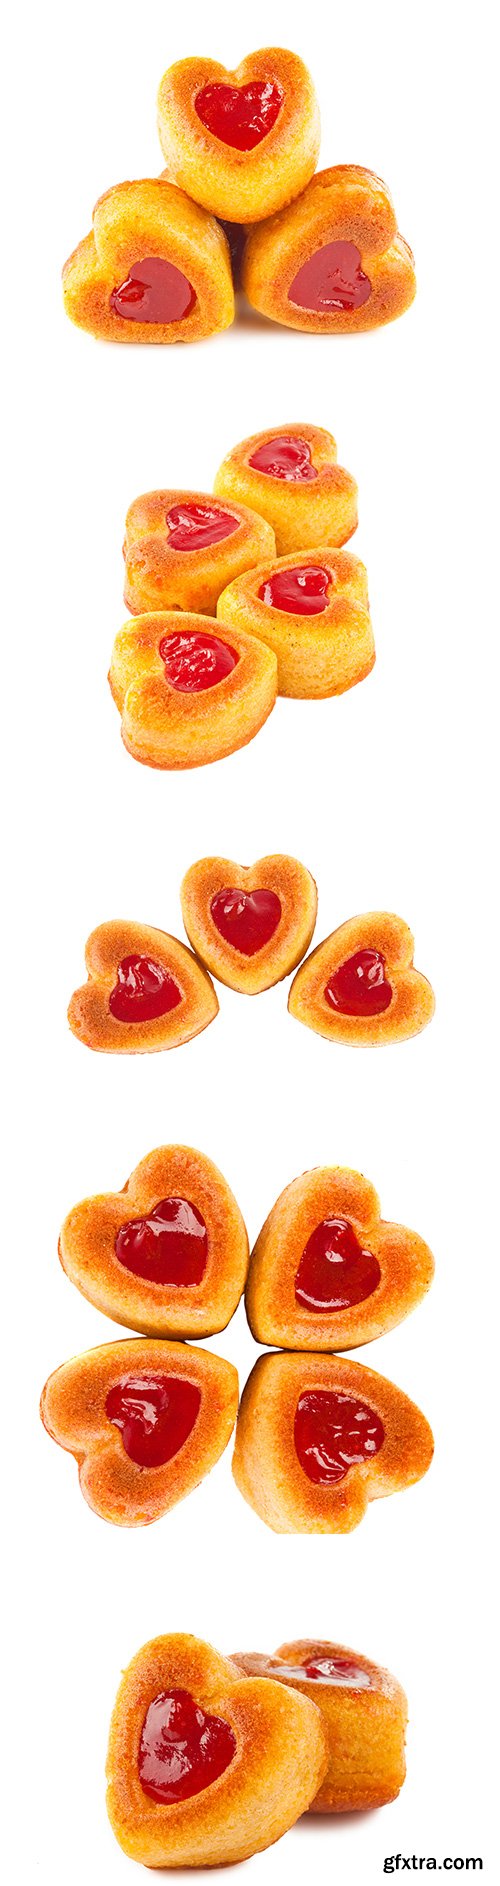 Muffins Heart Isolated - 10xJPGs